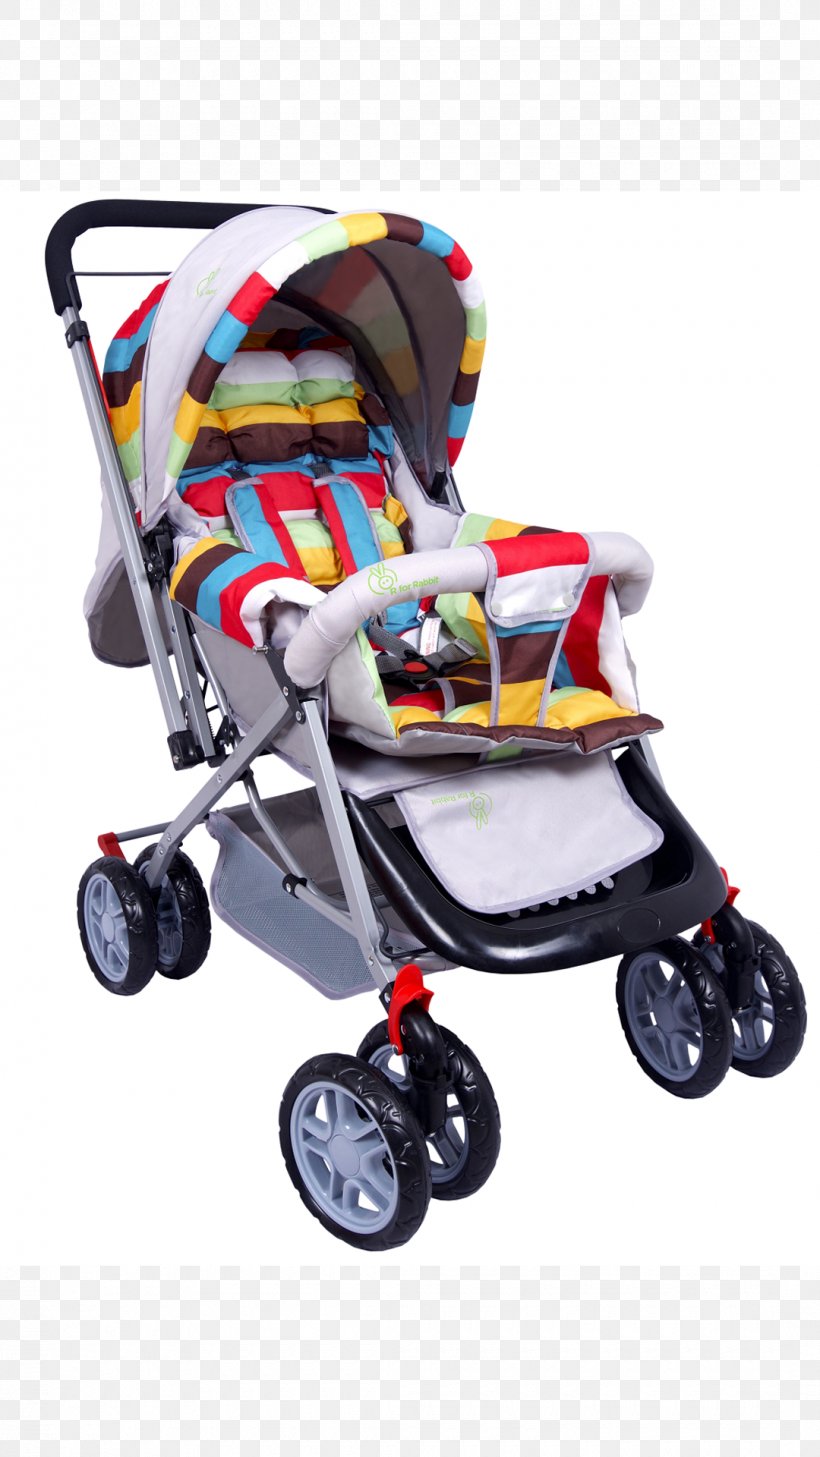 Baby Transport Infant Baby Walker Child R For Rabbit Baby Products Pvt. Ltd., PNG, 1080x1920px, Baby Transport, Baby Carriage, Baby Products, Baby Toddler Car Seats, Baby Walker Download Free